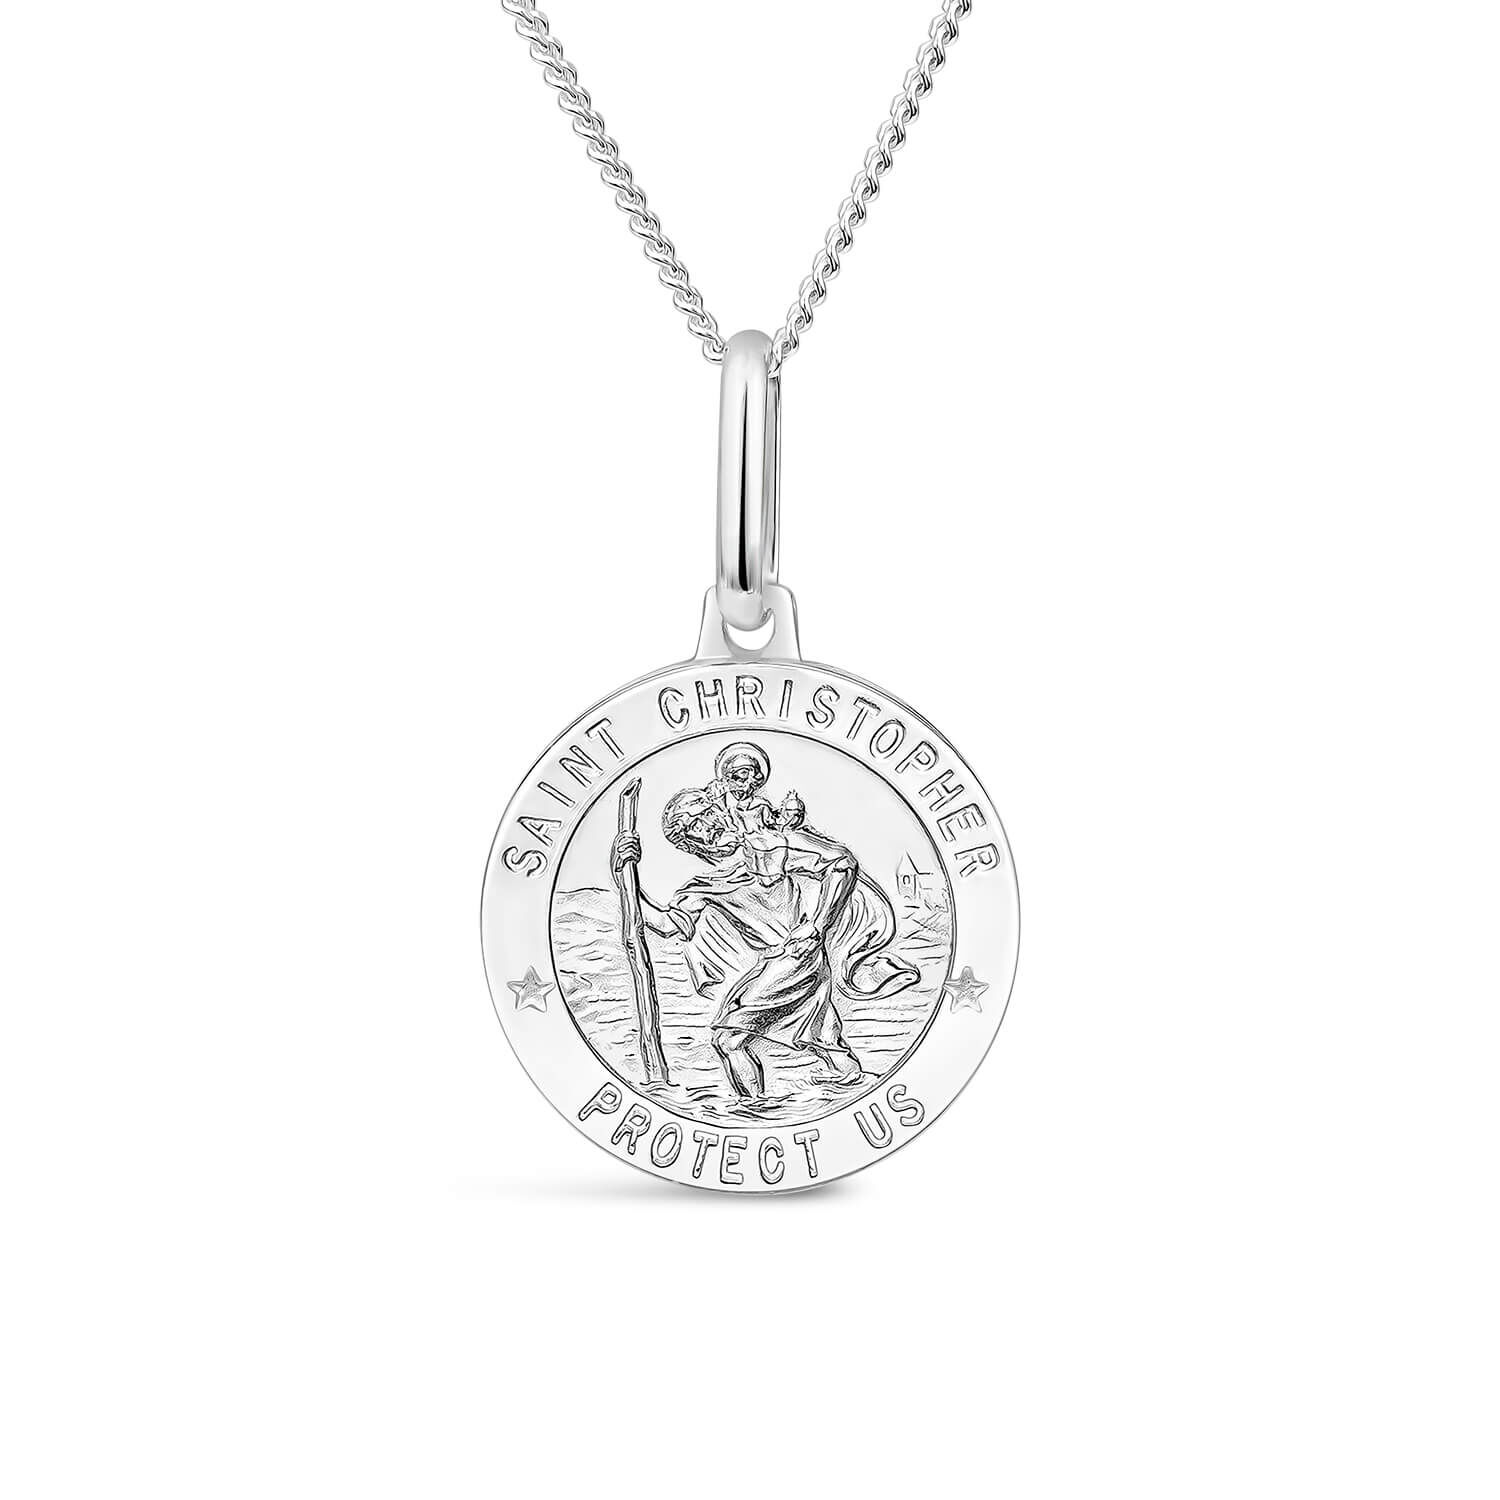 Large Saint Christopher Medal For Men Round Sterling Silver Necklace 24  Chain | eBay